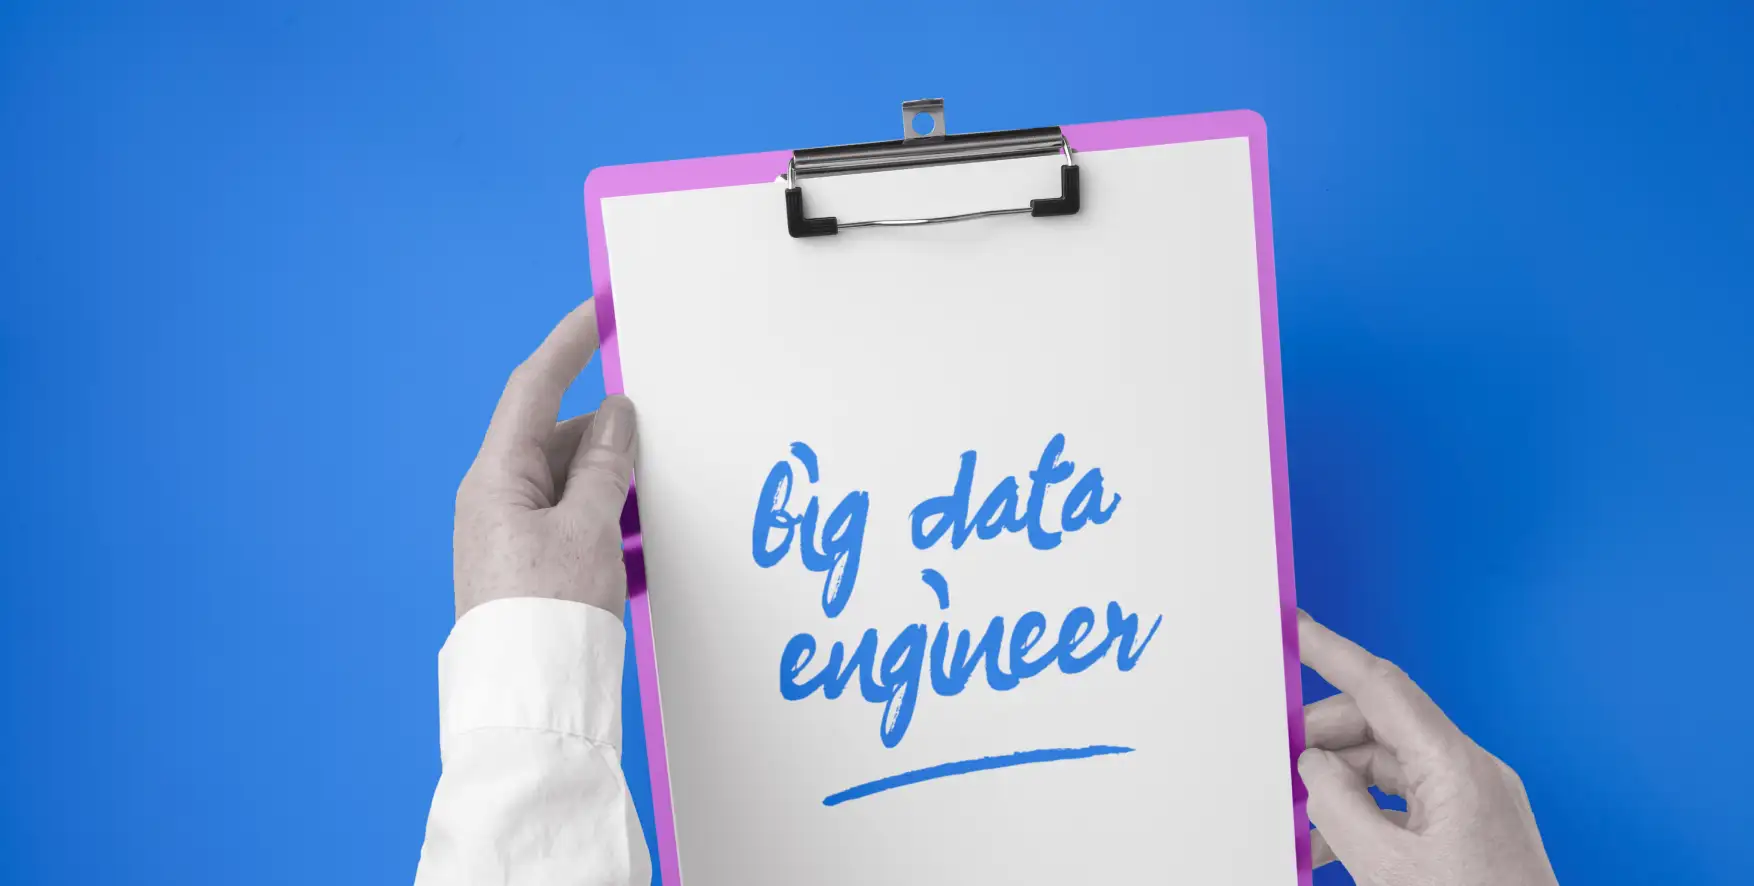 big data engineer written on a piece of paper in a clipboard